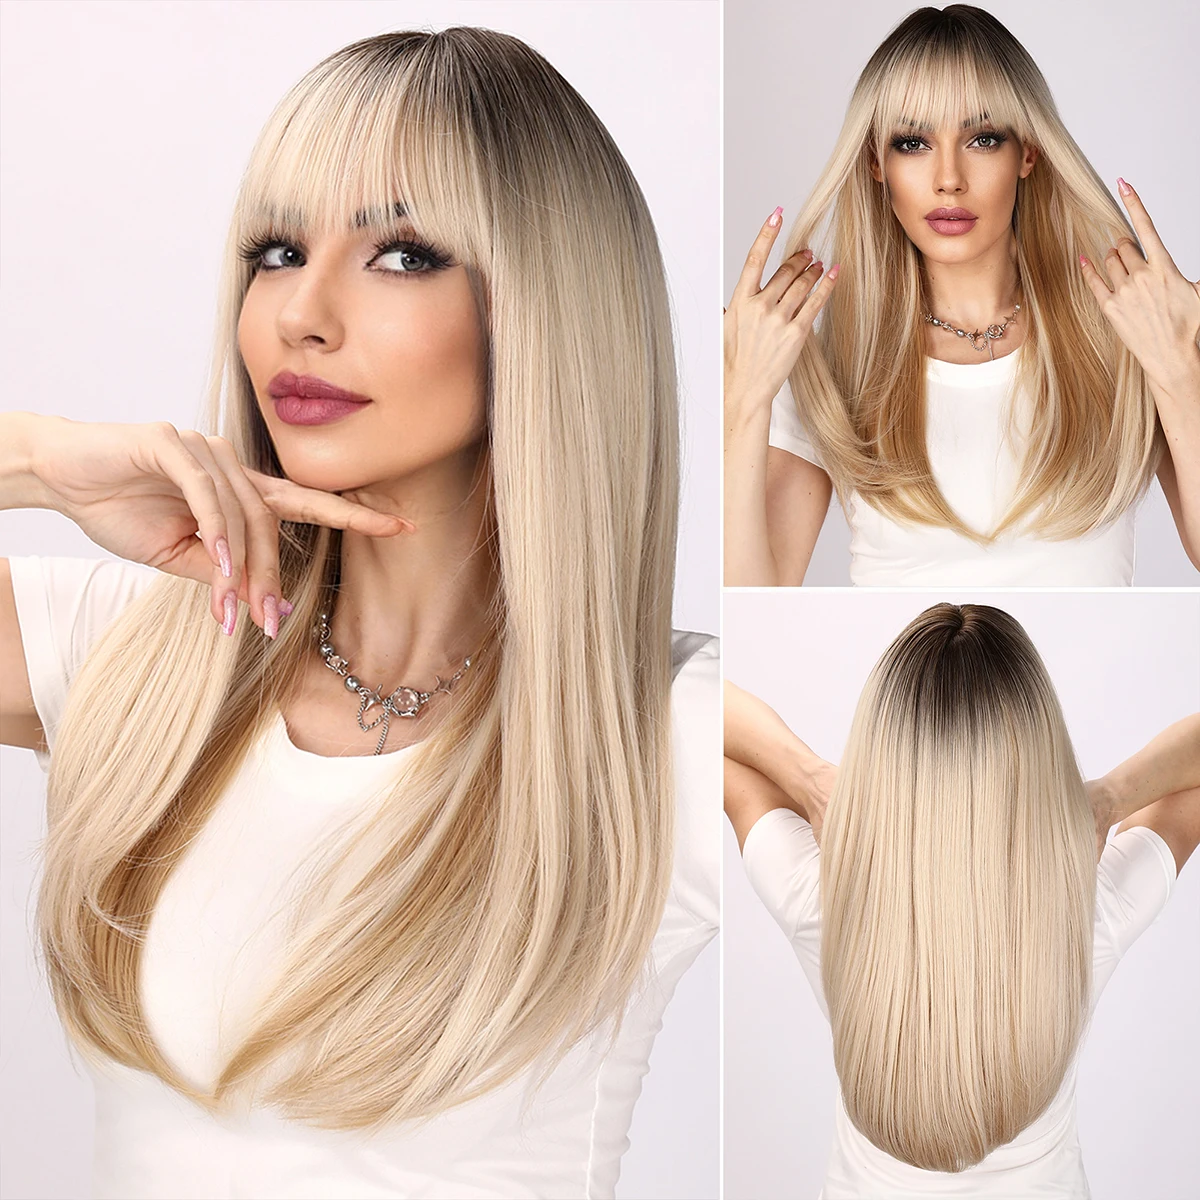 Light Gold Blonde Synthetic Wigs With Flat Bangs for Women Long Straight Hair Wig Natural Cosplay Party Heat Resistant Hair synthetic blonde wig with bangs short none lace front wig for women middle parting daily cosplay party heat resistant bang wig